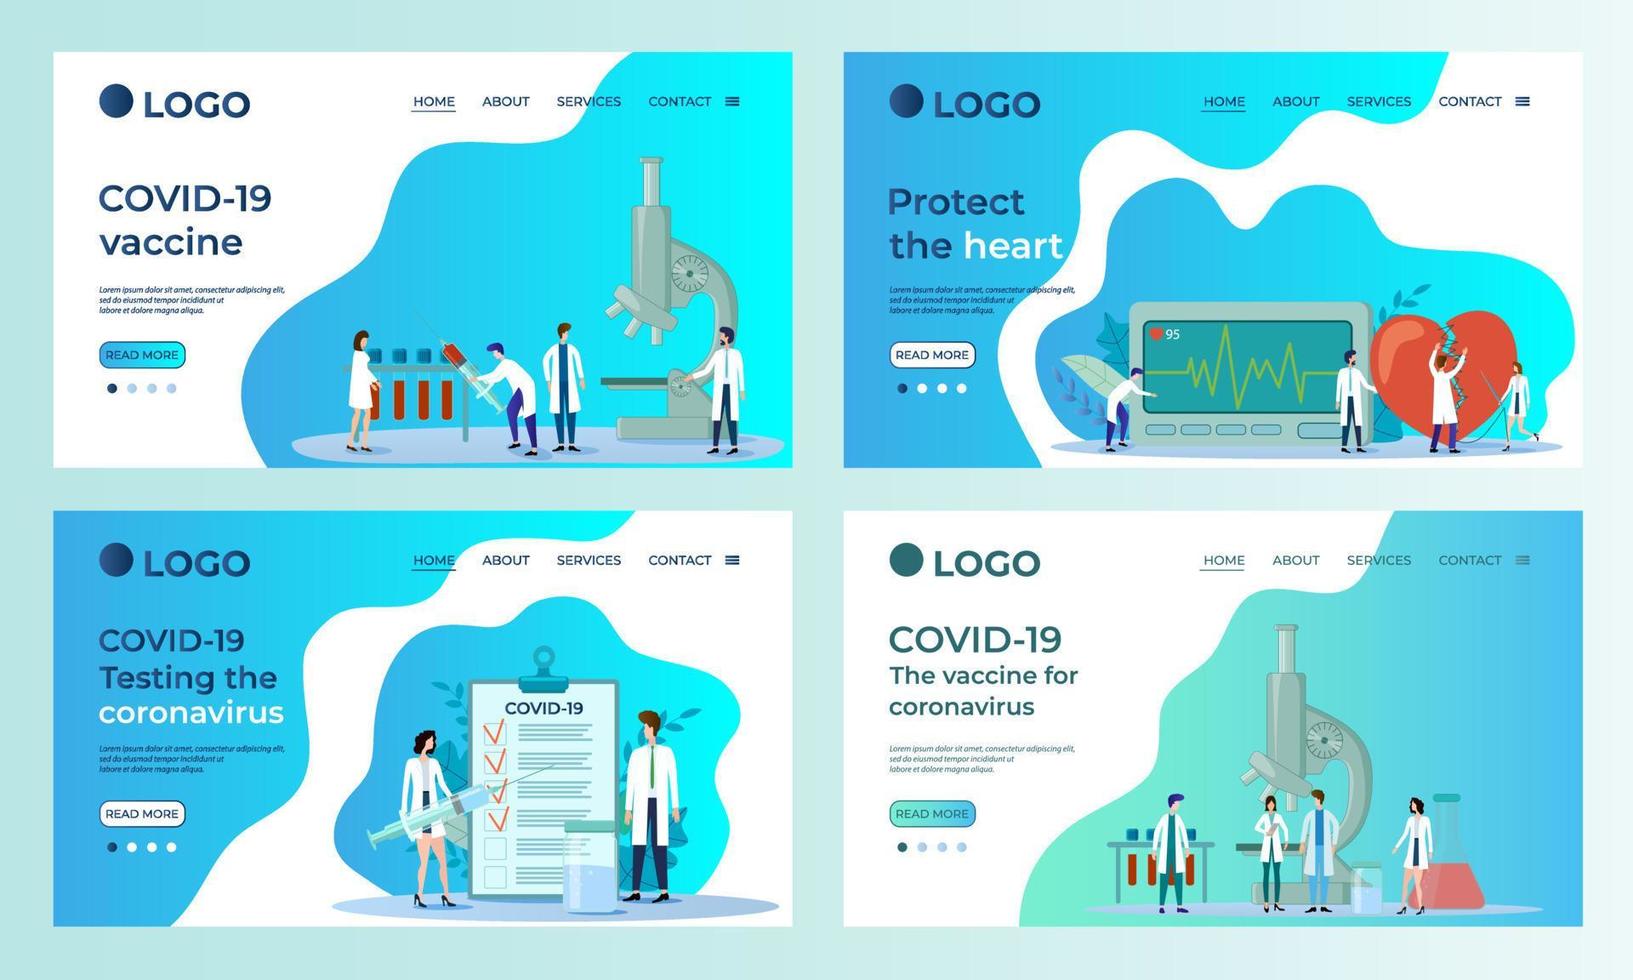 Set of landing page templates. COVID19, coronavirus, testing, health protection.Templates for use in mobile app development.Flat vector illustration.